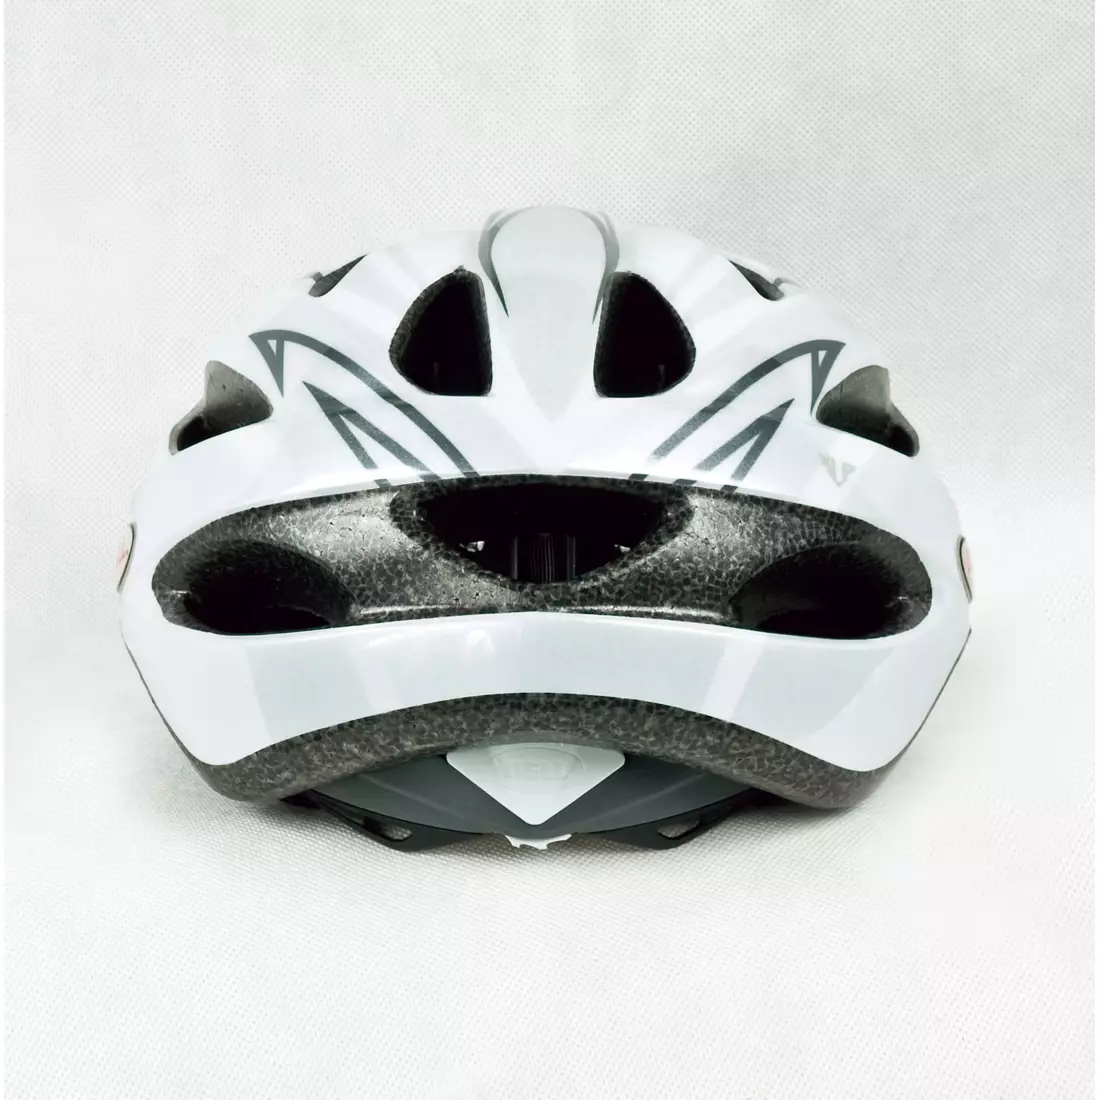 BELL XLP bicycle helmet, white and silver, large size